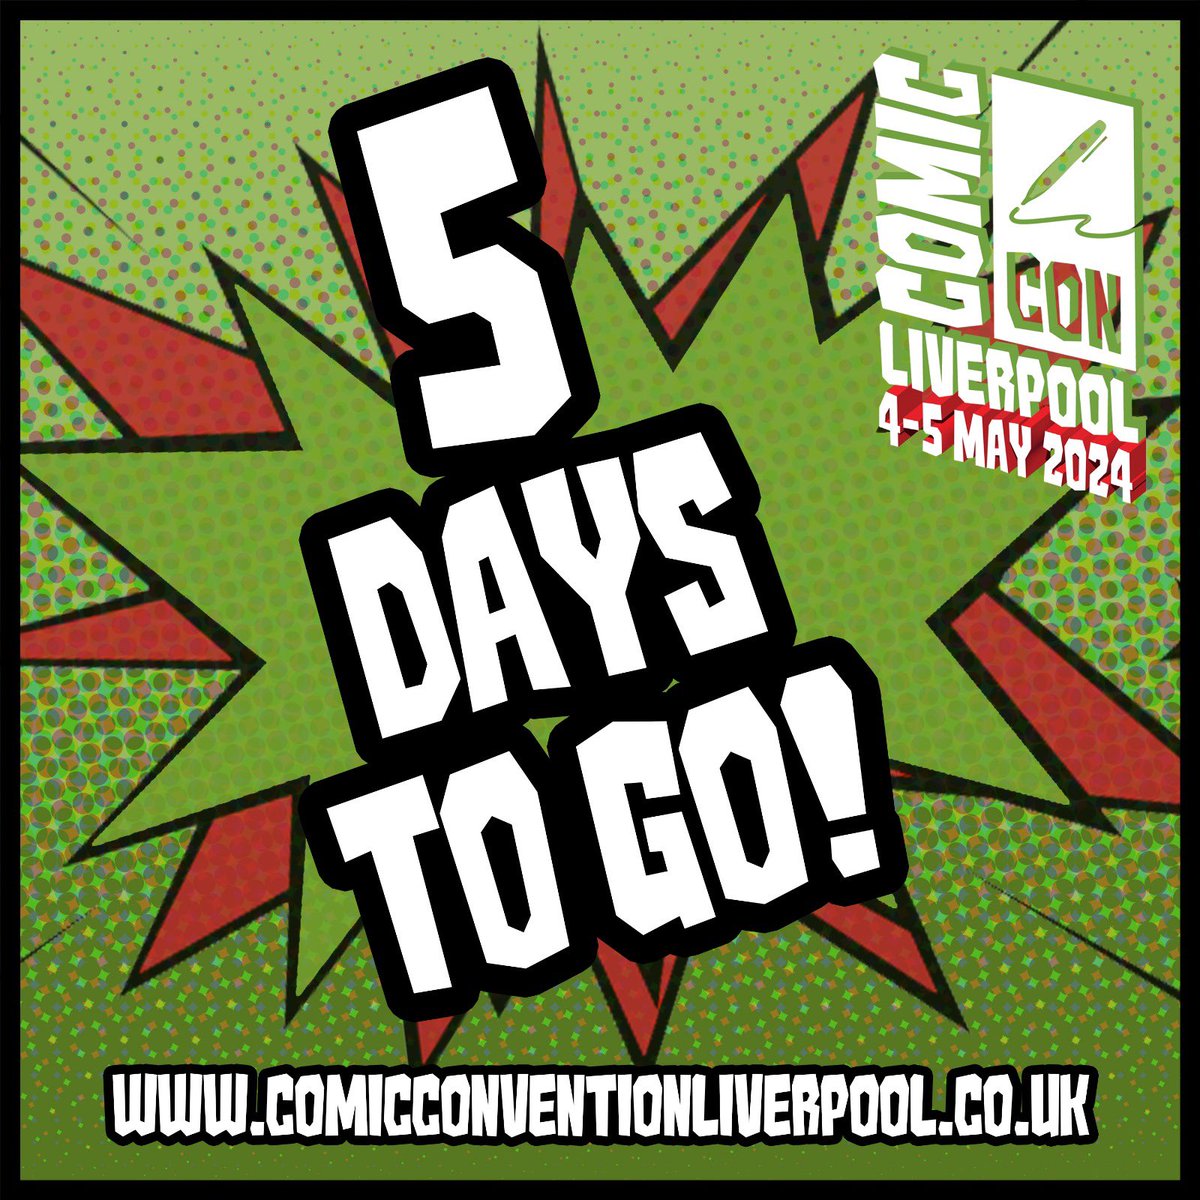 5 days to go! Secure your tickets at comicconventionliverpool.co.uk